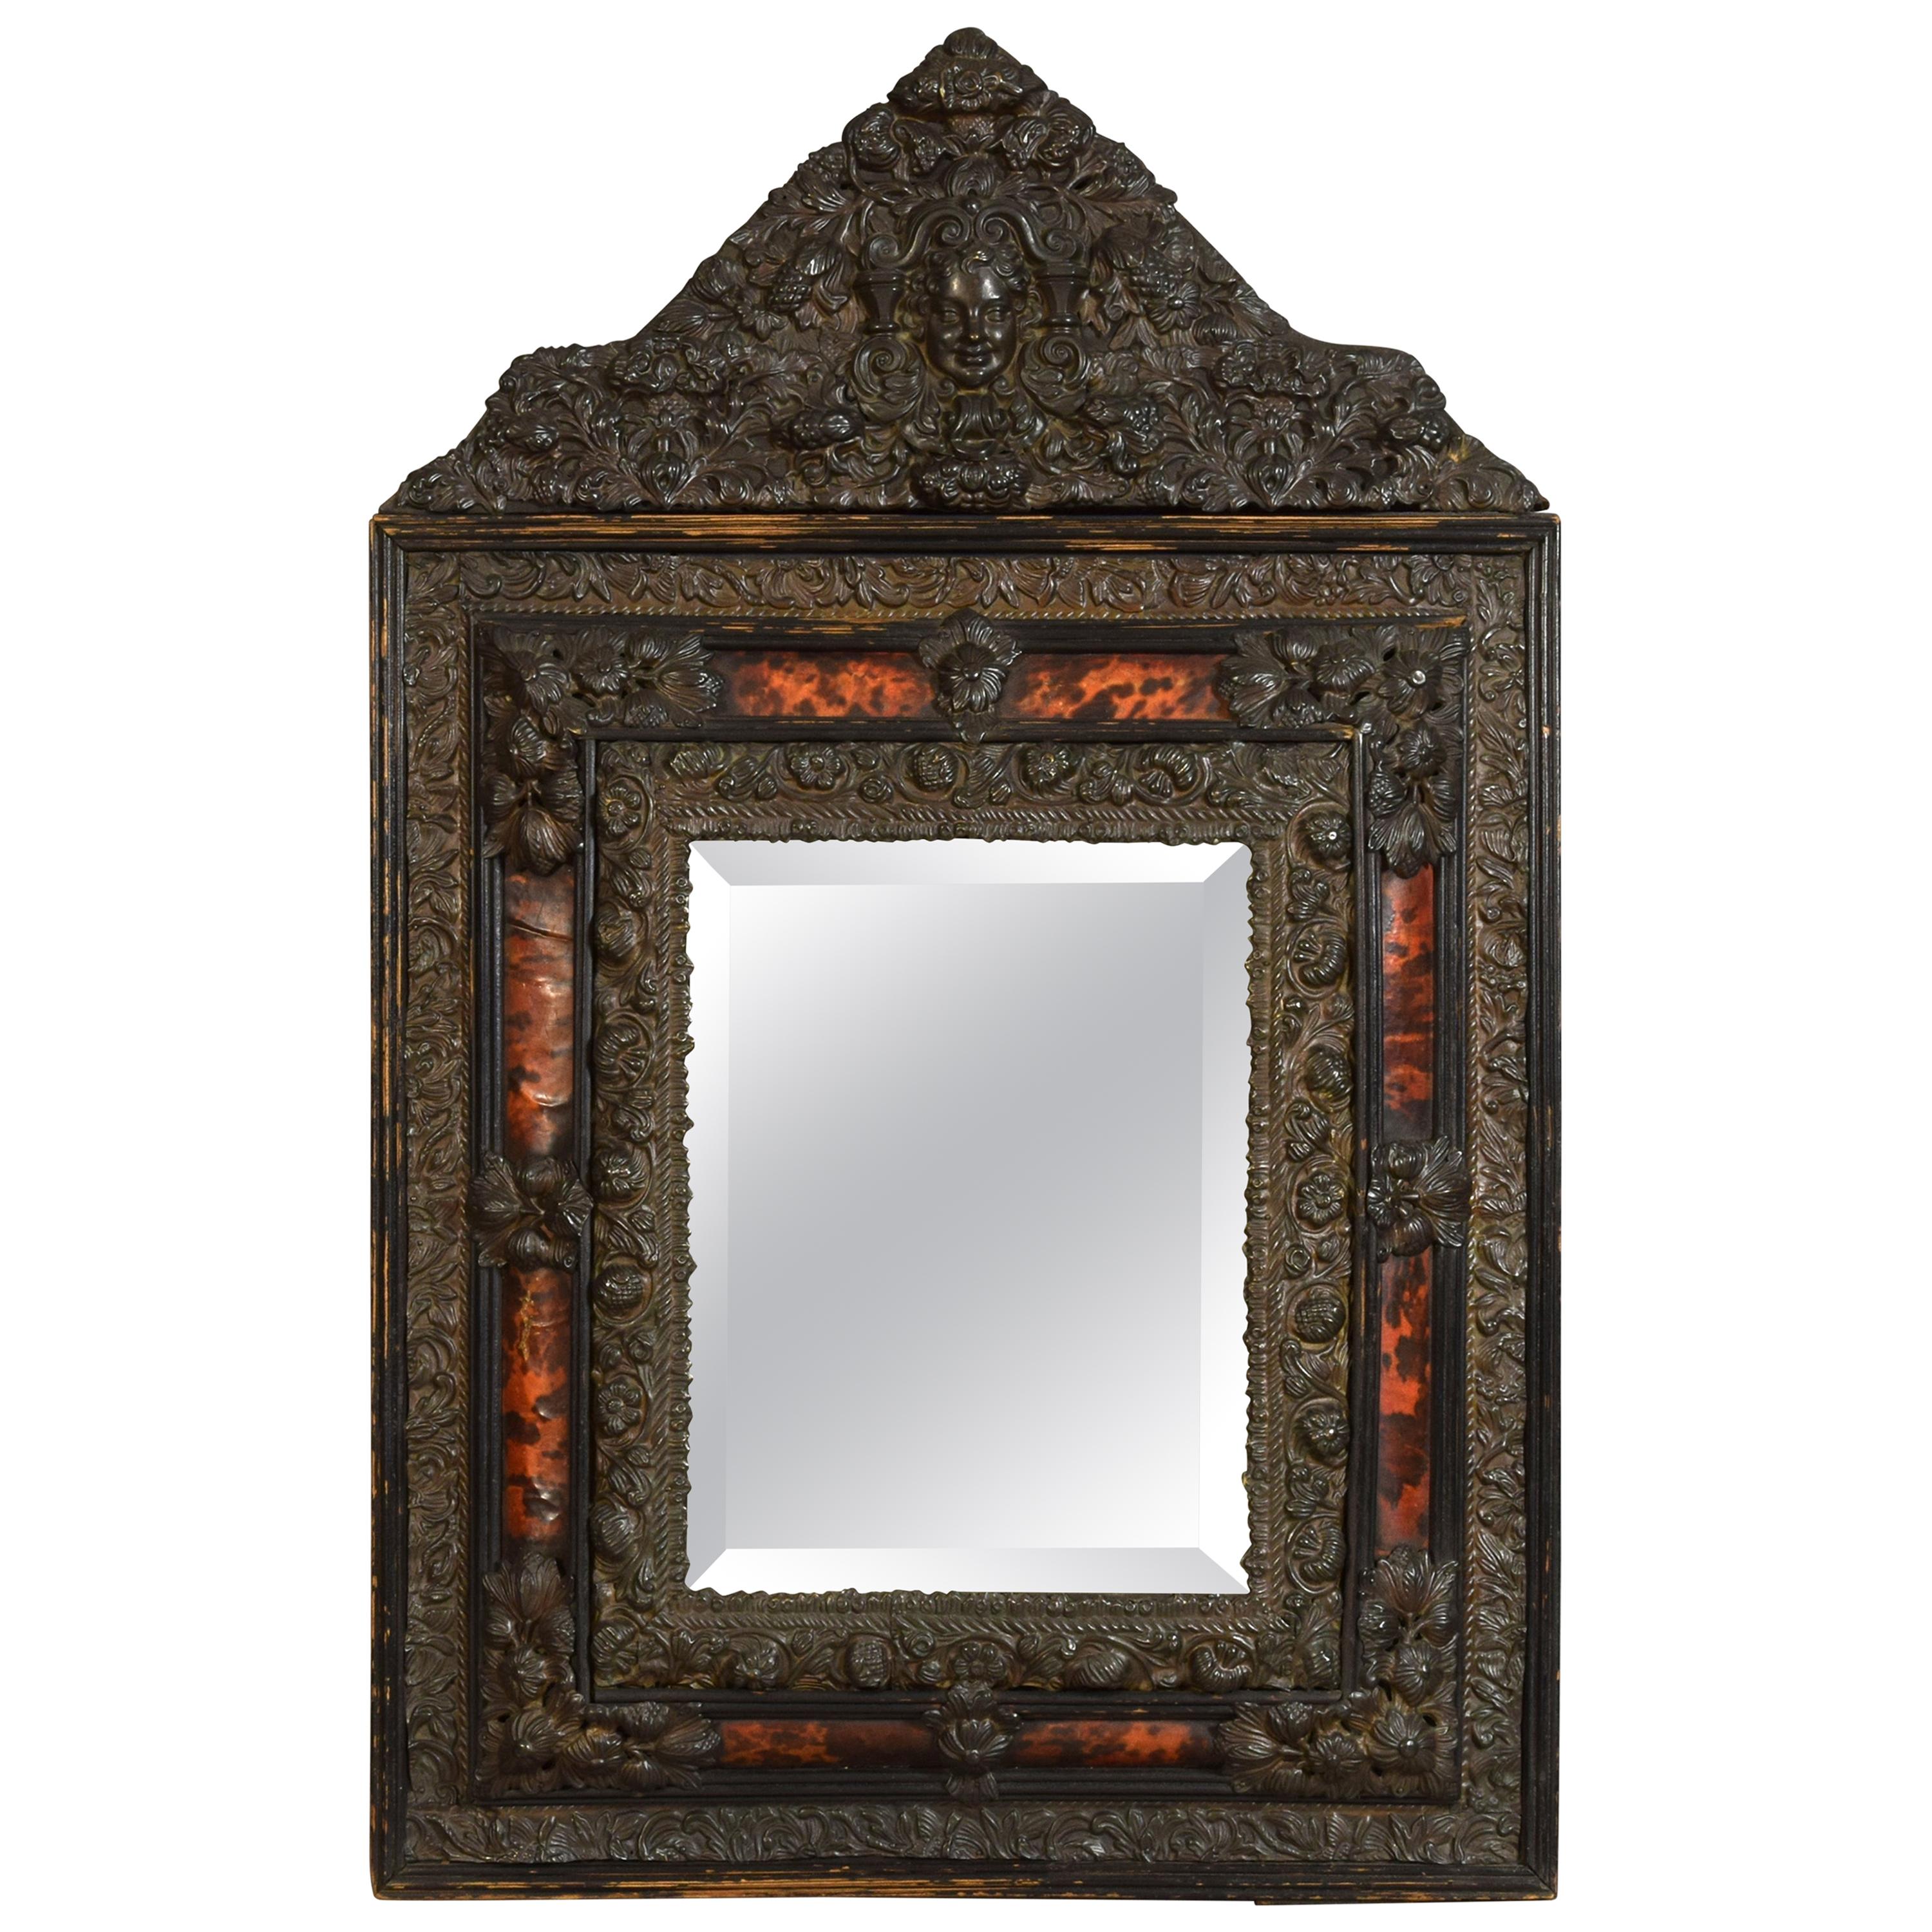 19th Century, Northern Europe Embossed and Burnished Metal Mirror